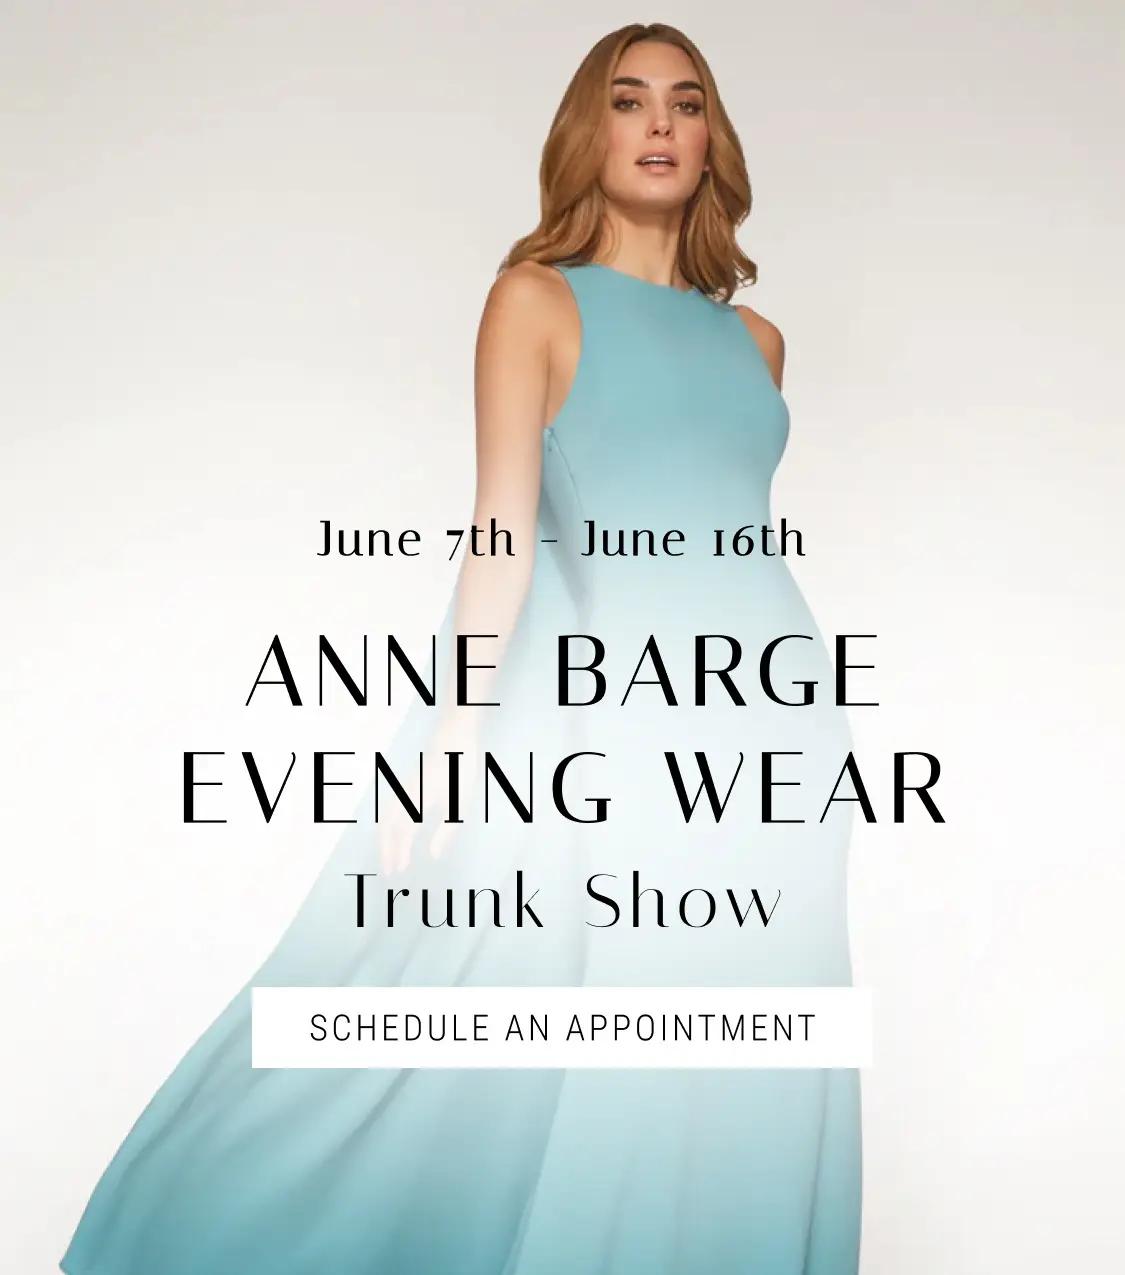 Anne Barge Evening Wear Trunk Show Banner Mobile